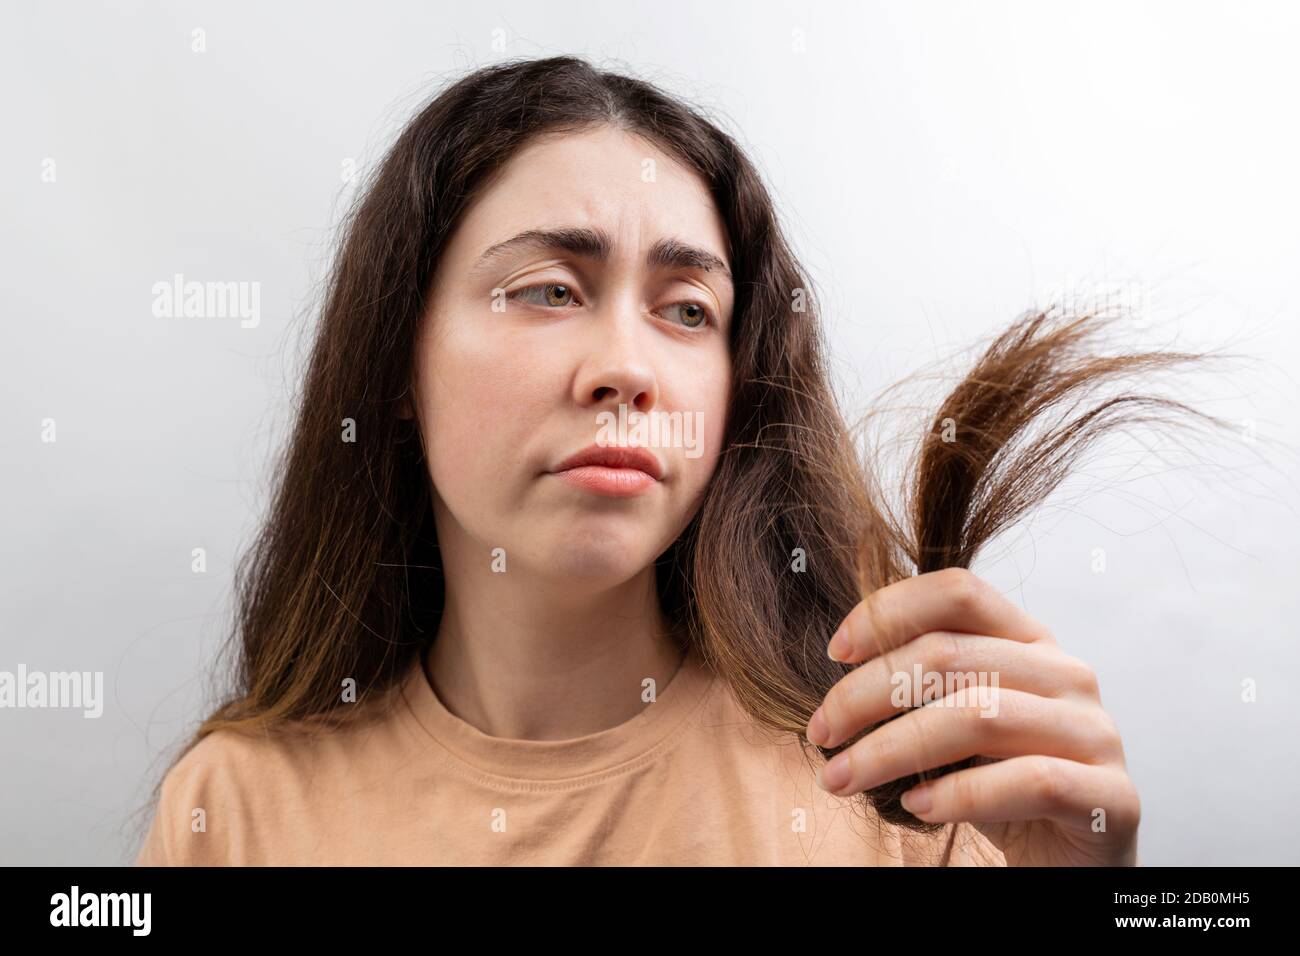 A. young Caucasian woman in a beige t-shirt looks distressed at the dry ends of her long hair. White background. Stock Photo